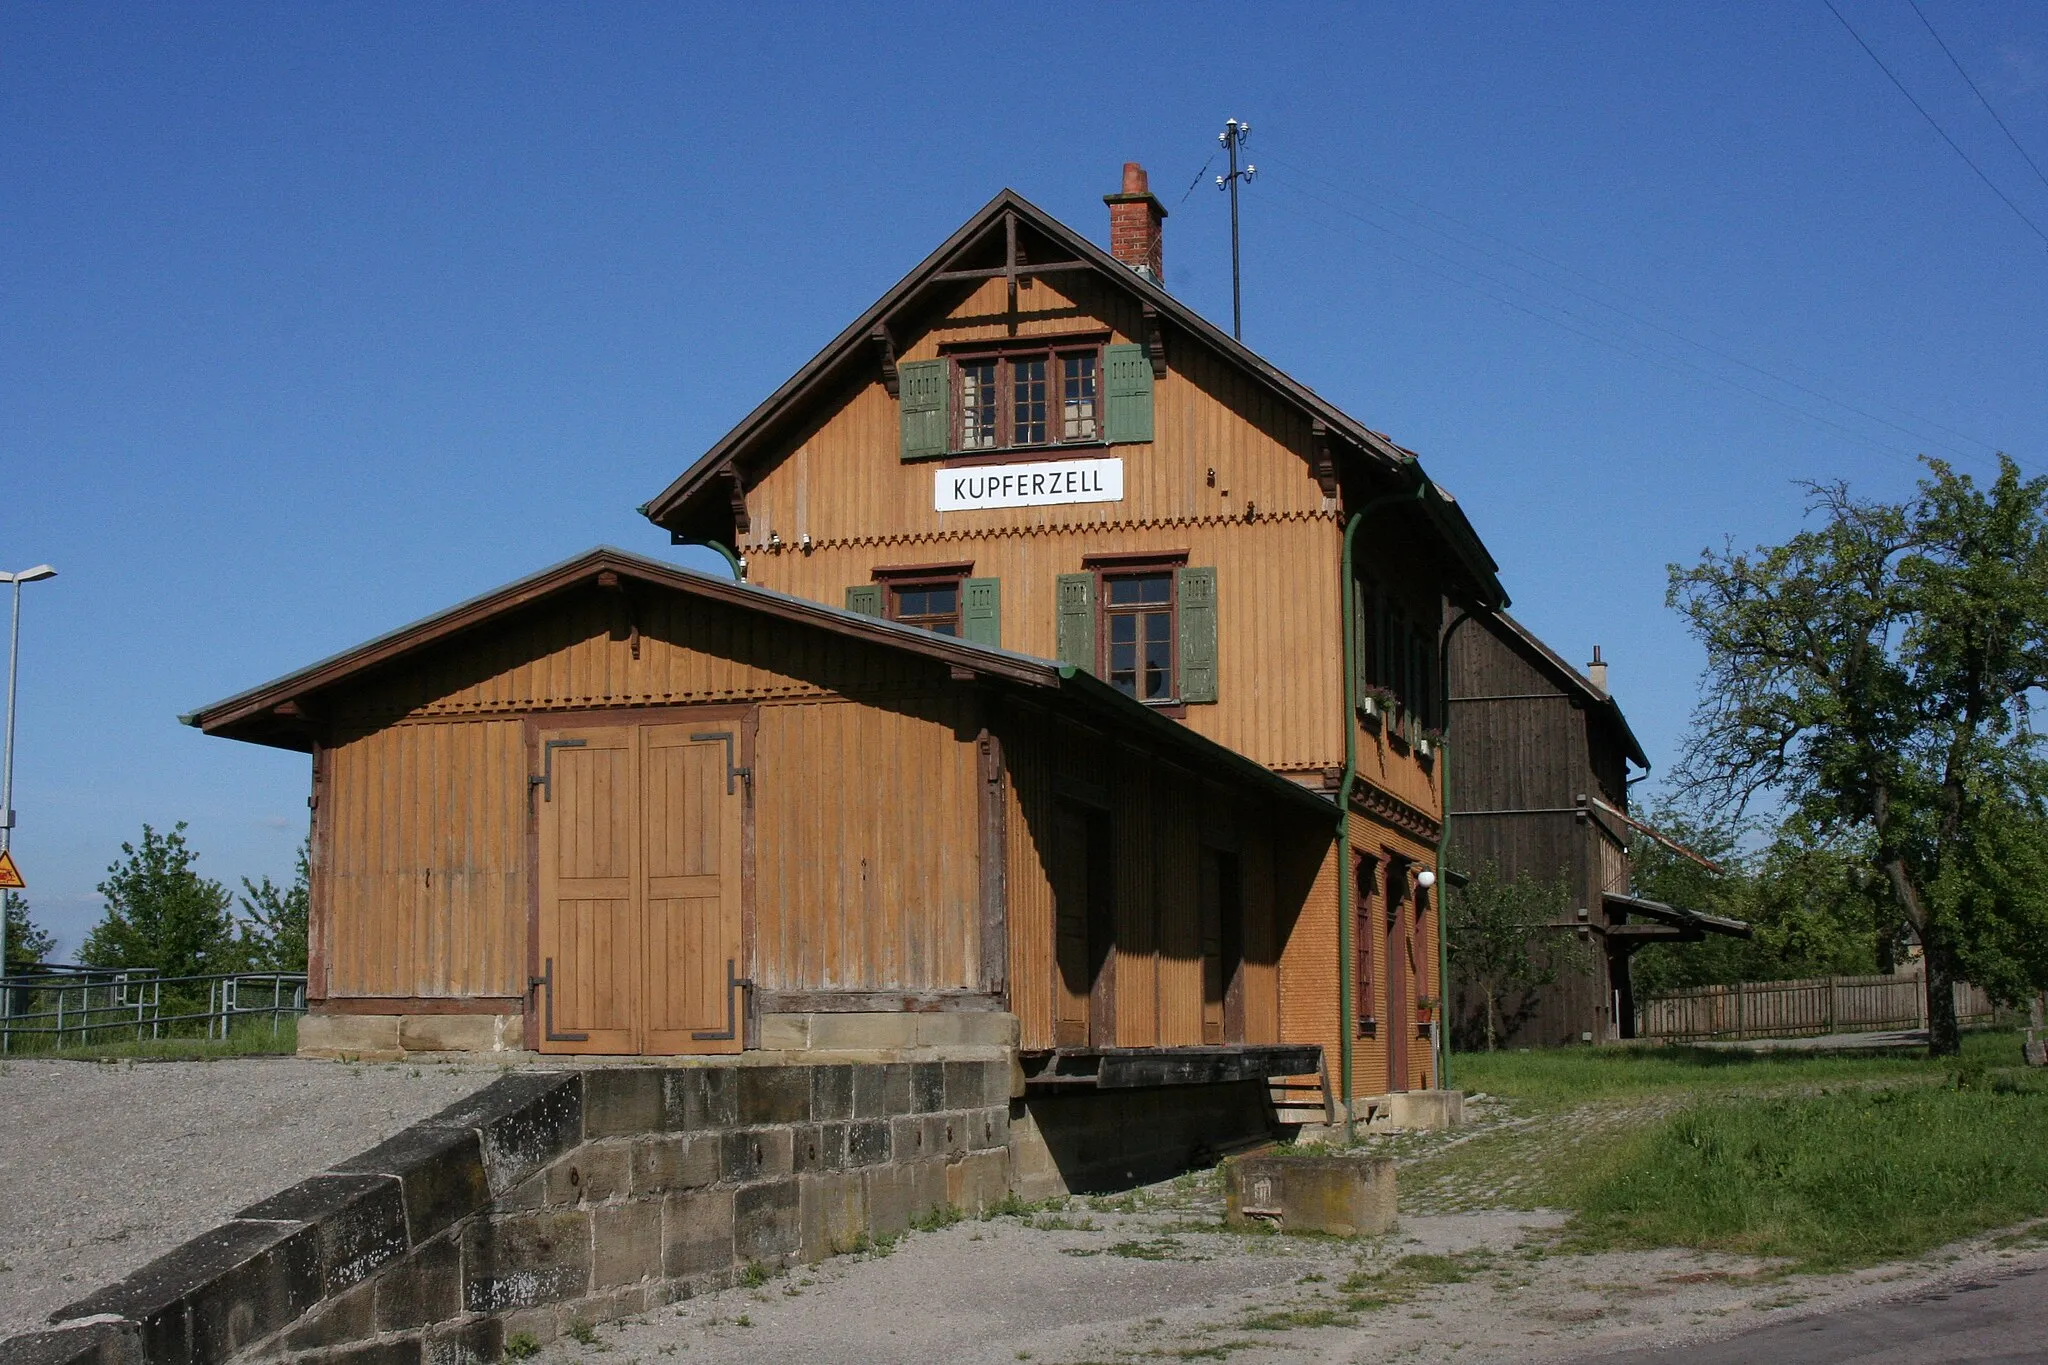 Photo showing: The old train station of Kupferzell in the Open Air Museum Wackershofen